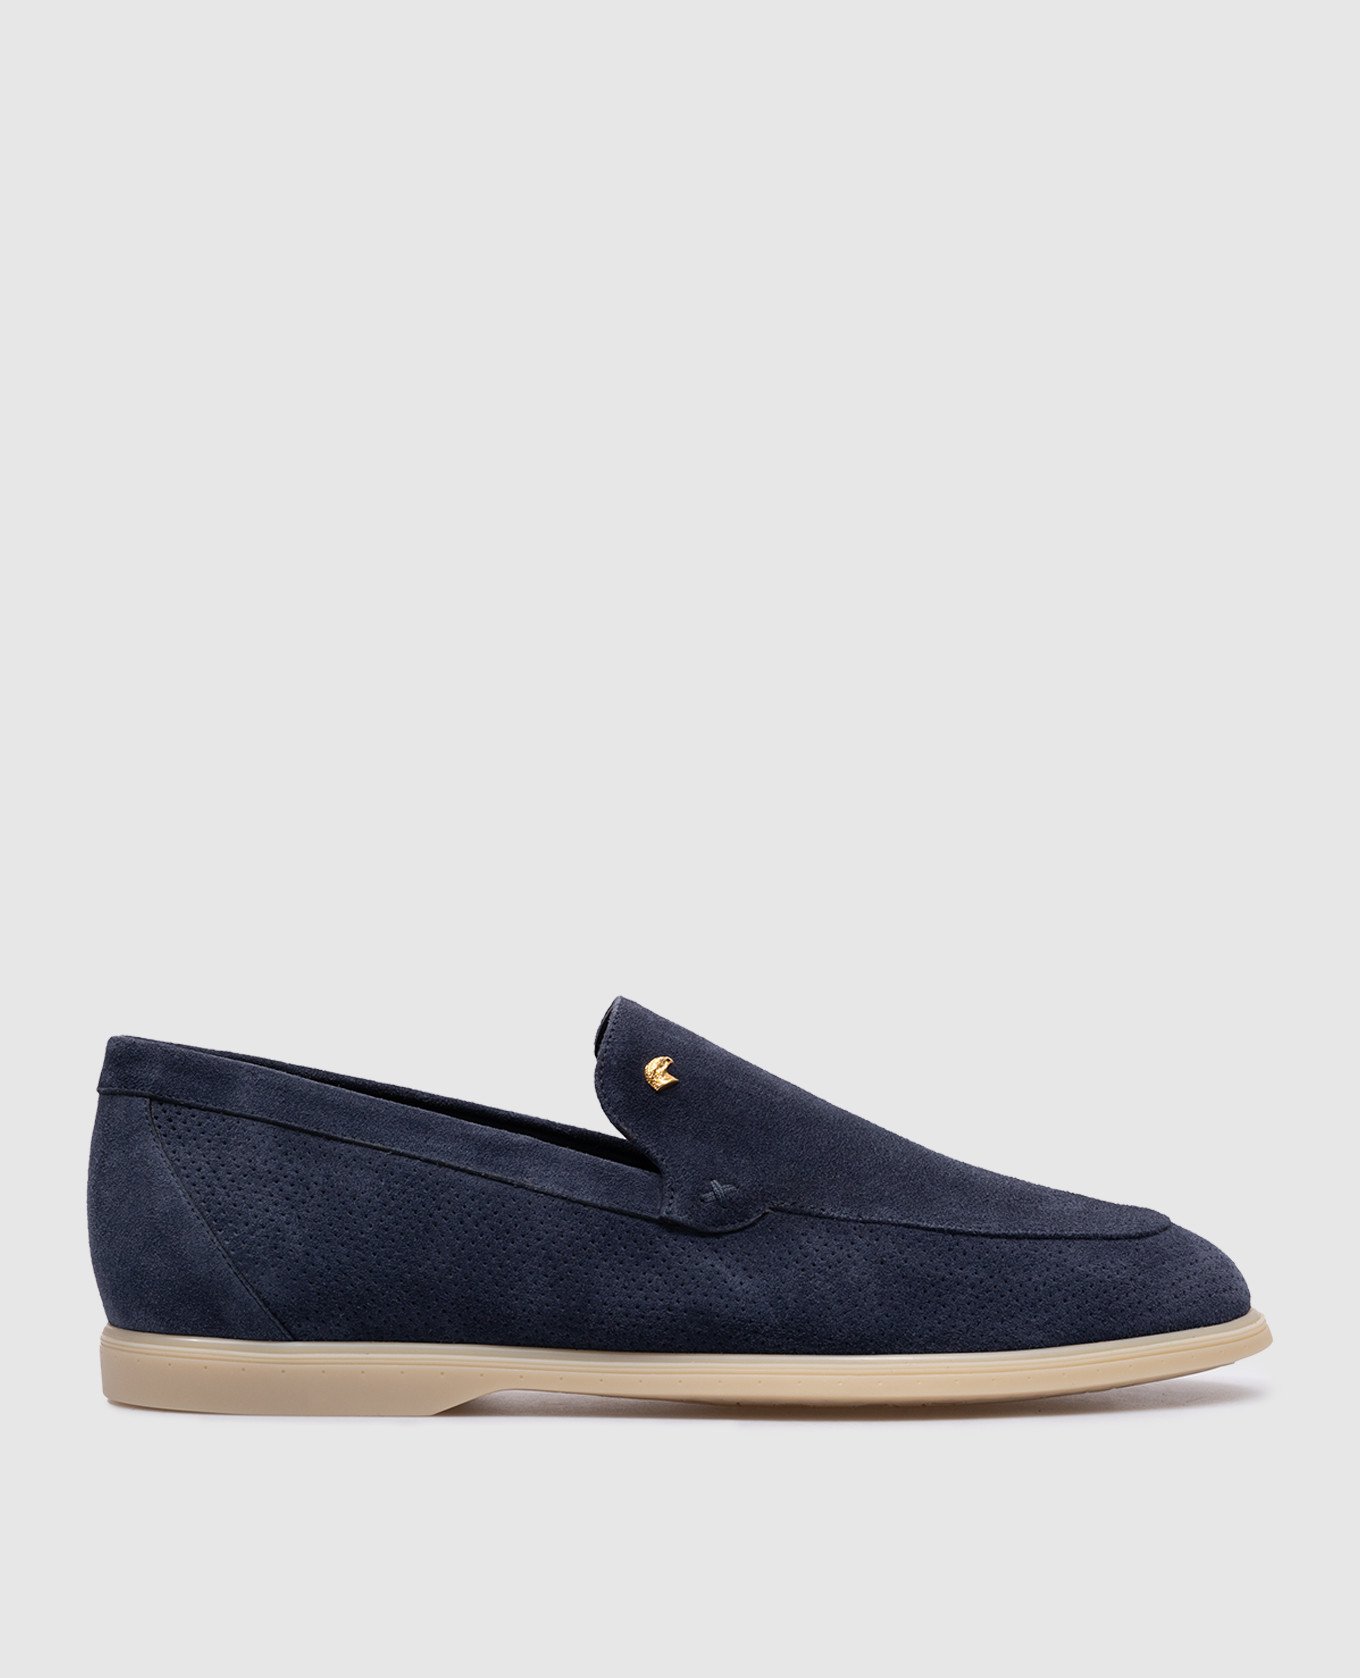 Blue suede loafers with metallic logo